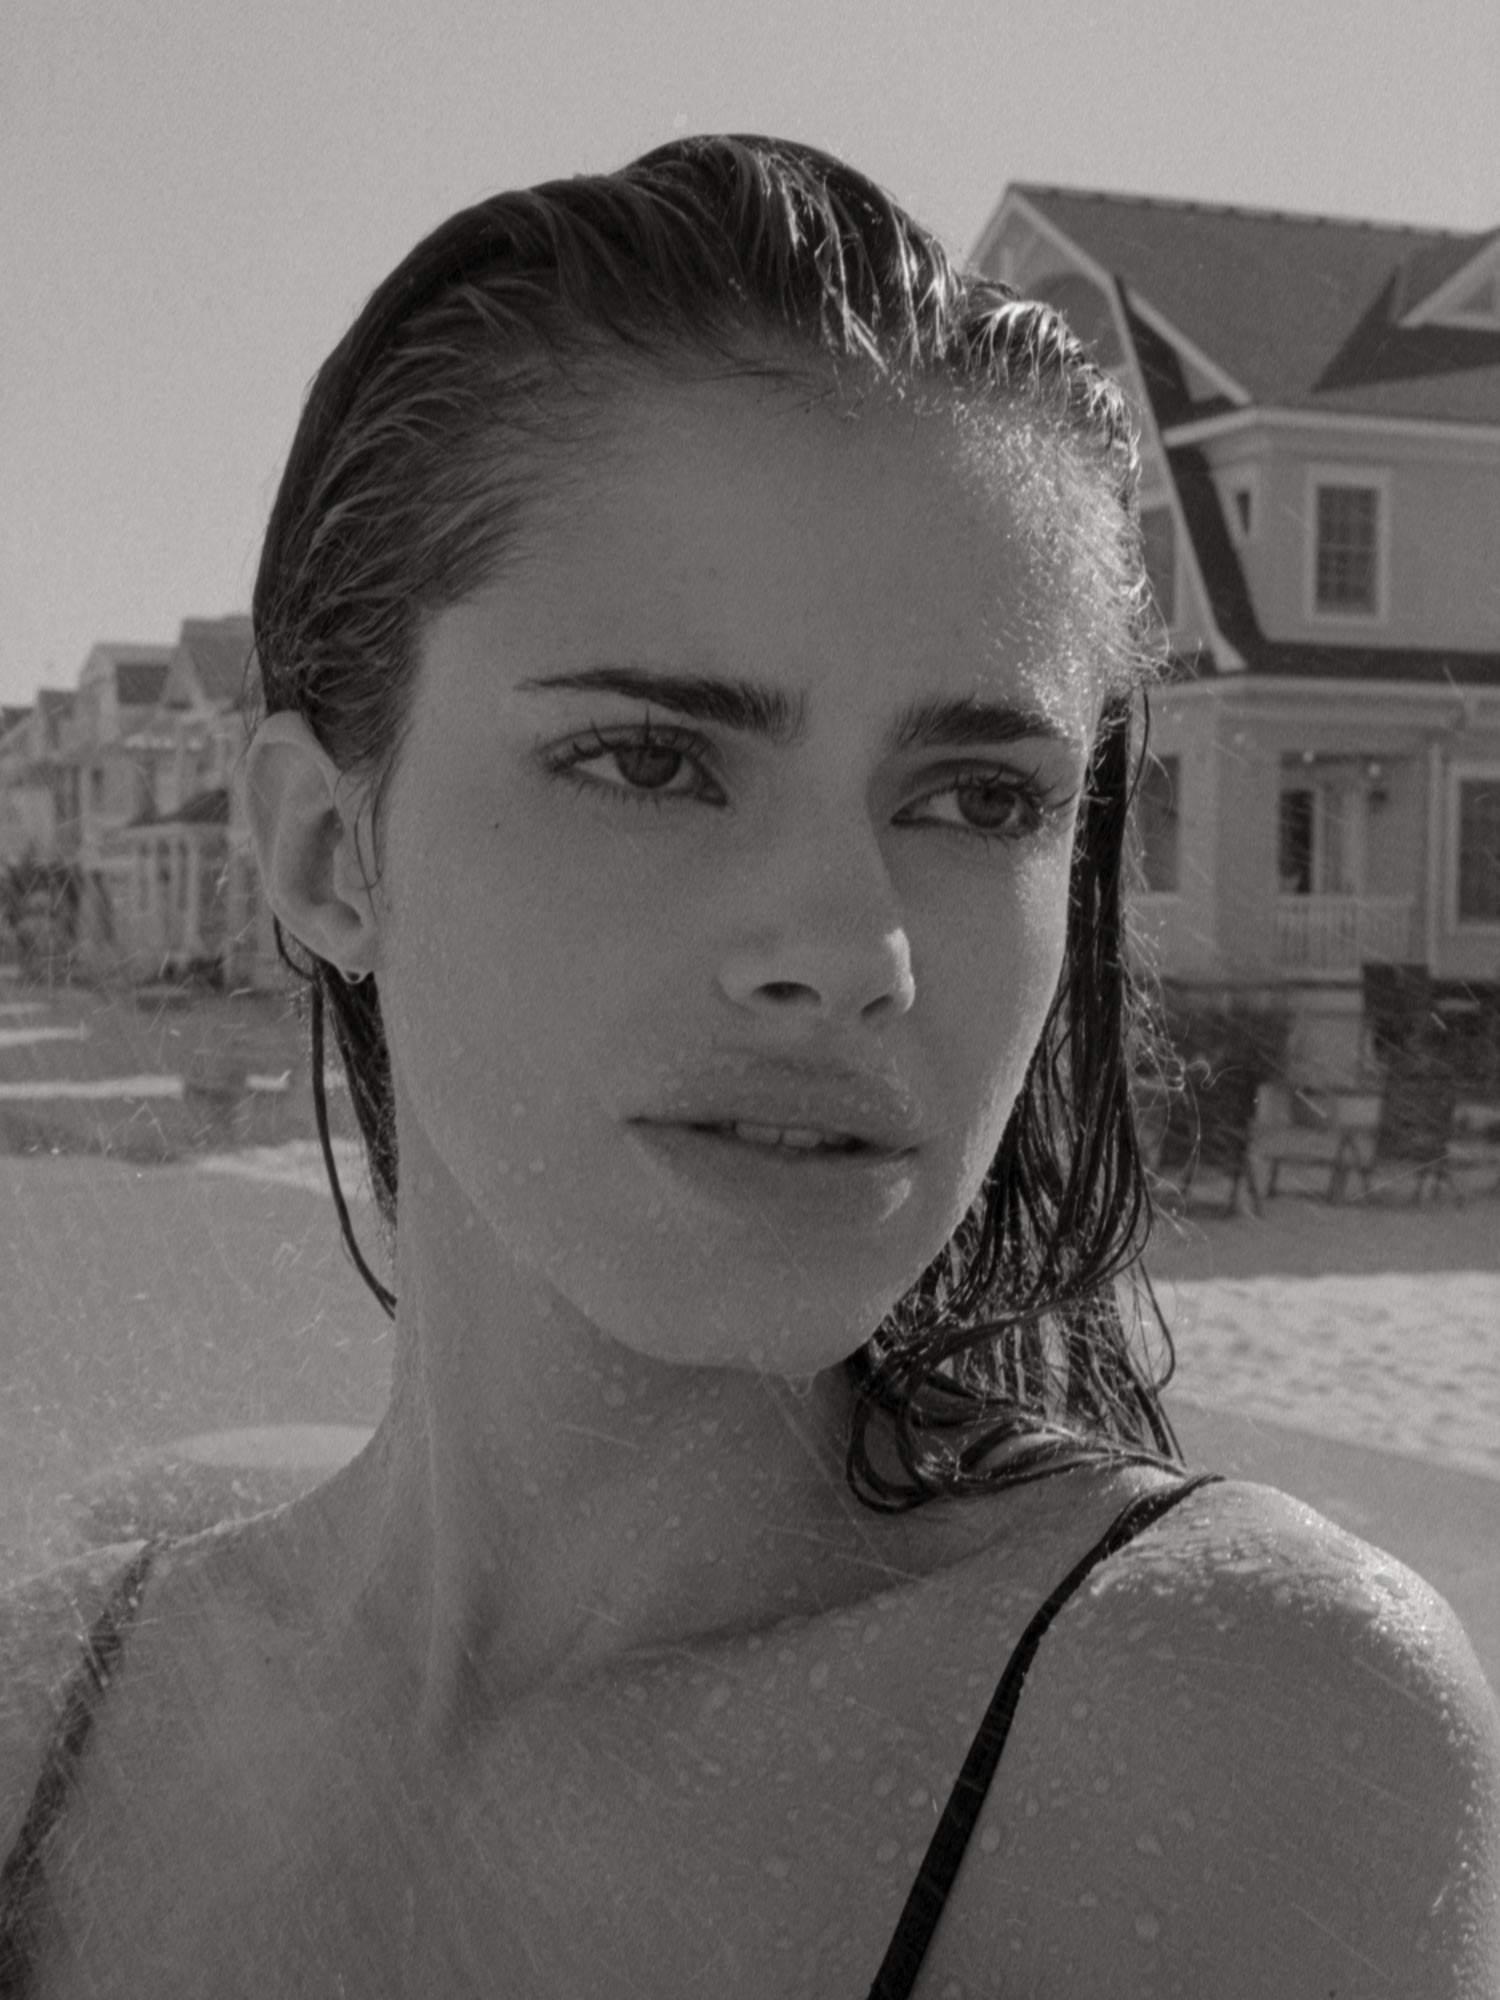 Black and white photo of female model Carmin Valencia on a New Jersey beach, her hair is wet, water droplets on her face and body, water splashing on her face, she is wearing a black Zara dress, vacation houses in the background. Photographed by New York photographer Maria Bruun. Nikon film camera and Ilford film. "High Tide" Fashion editorial for Nasty Magazine.